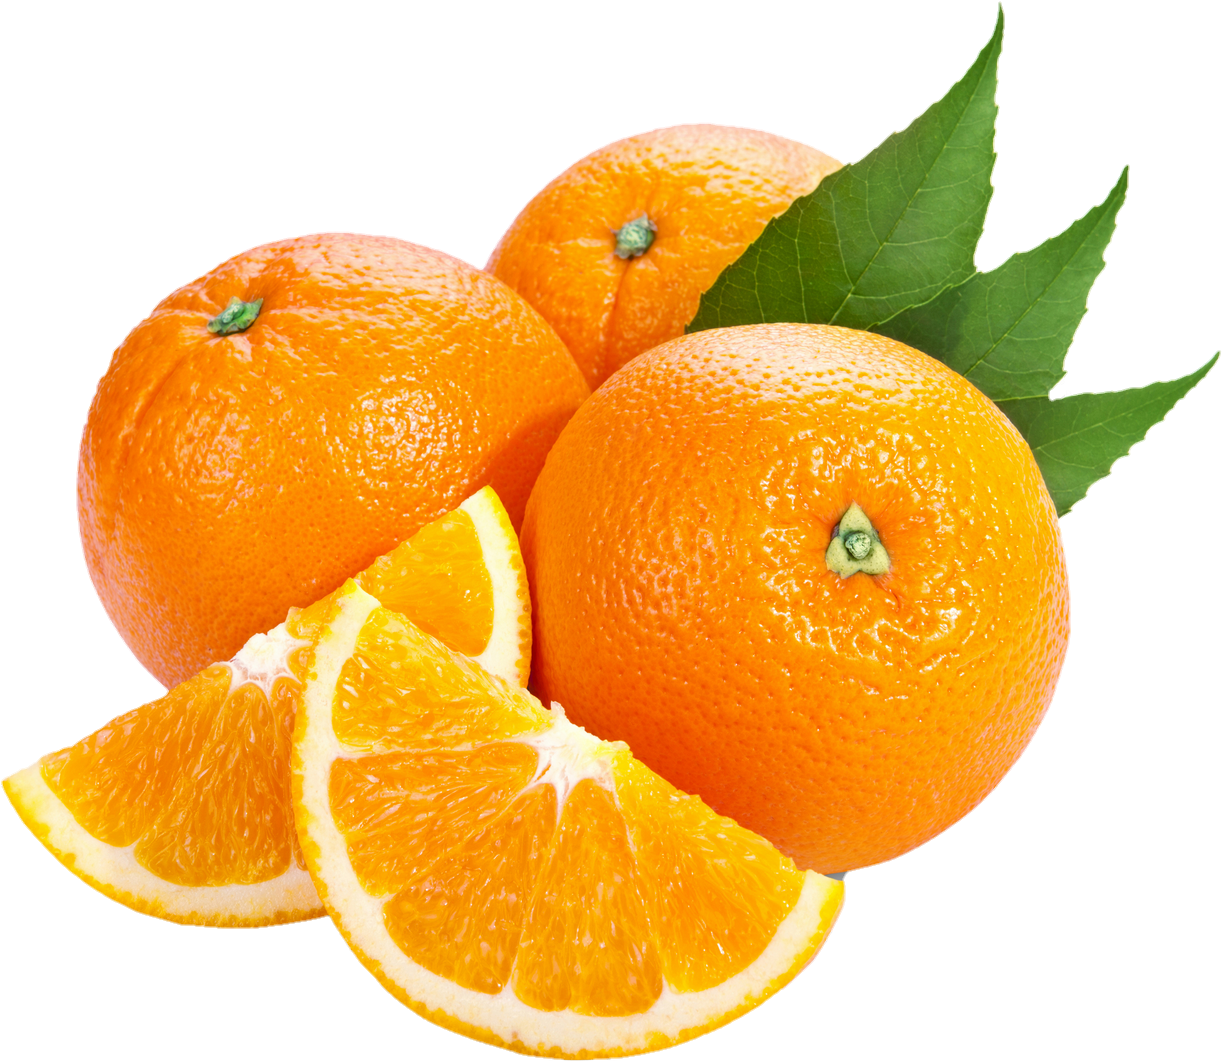 orange-png-from-pngfre-6